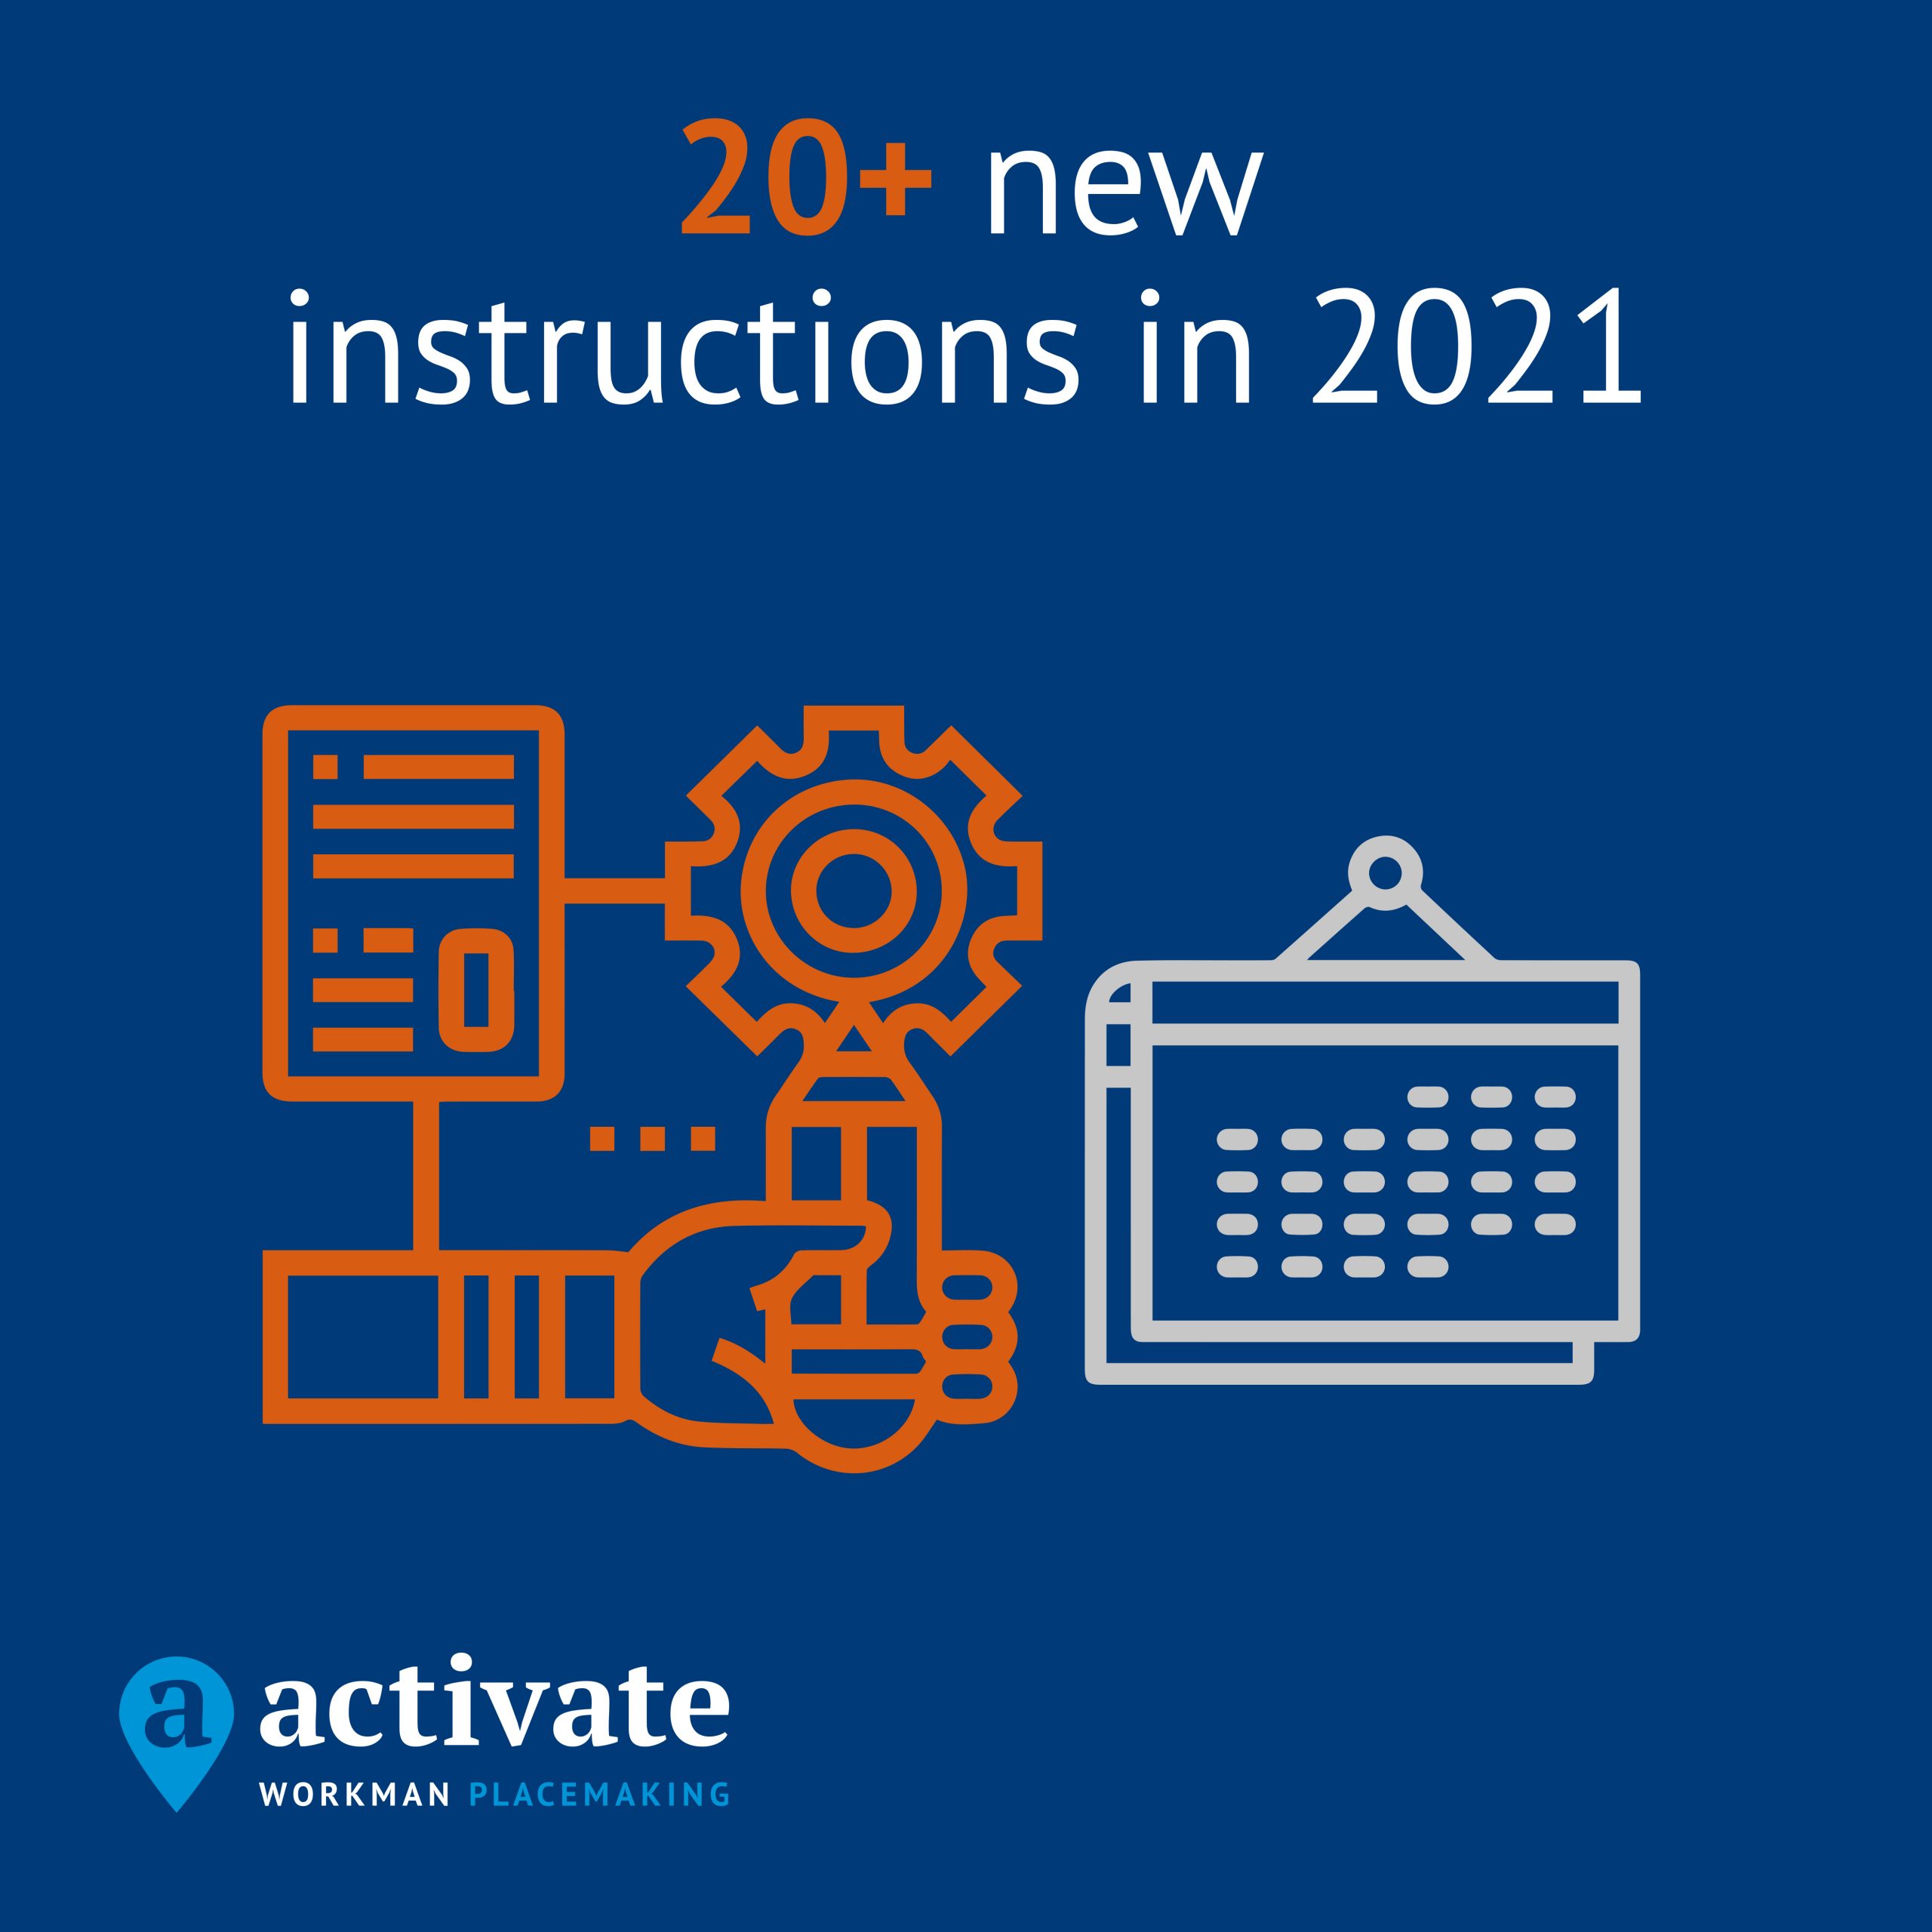 20+ new instructions in 2021